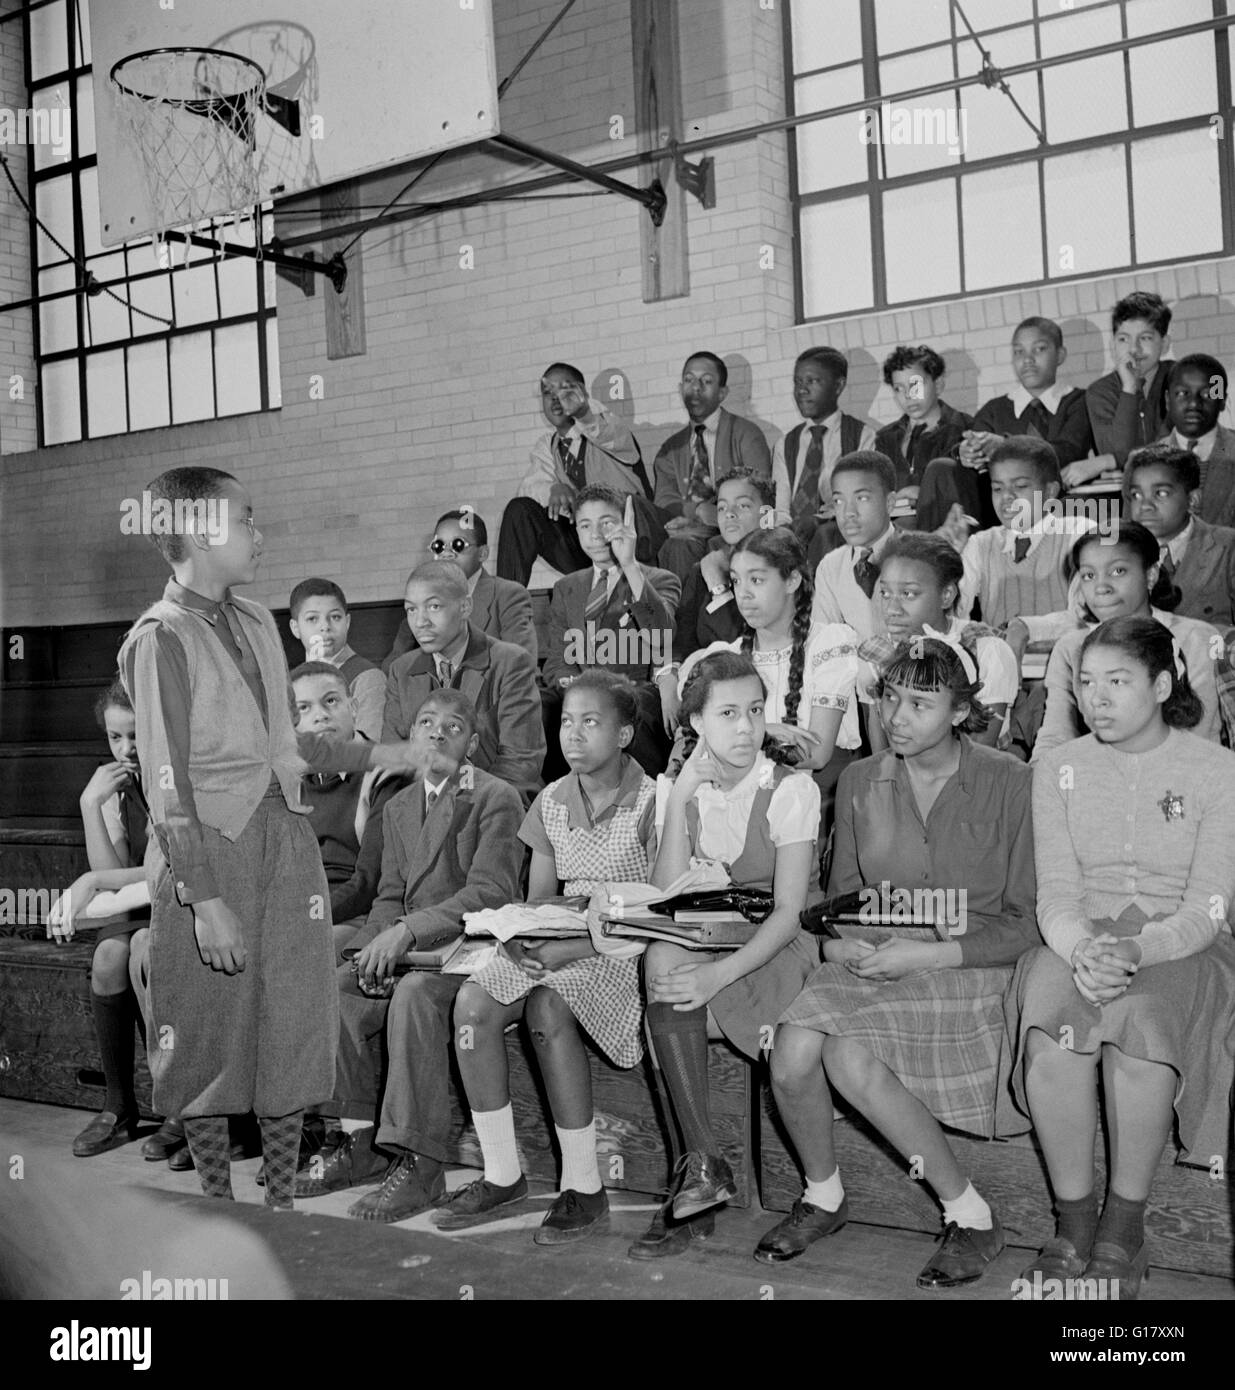 Student Council Meeting, Banneker Junior High School, Washington DC, USA, Marjorie Collins for Farm Security Administration, March 1942 Stock Photo